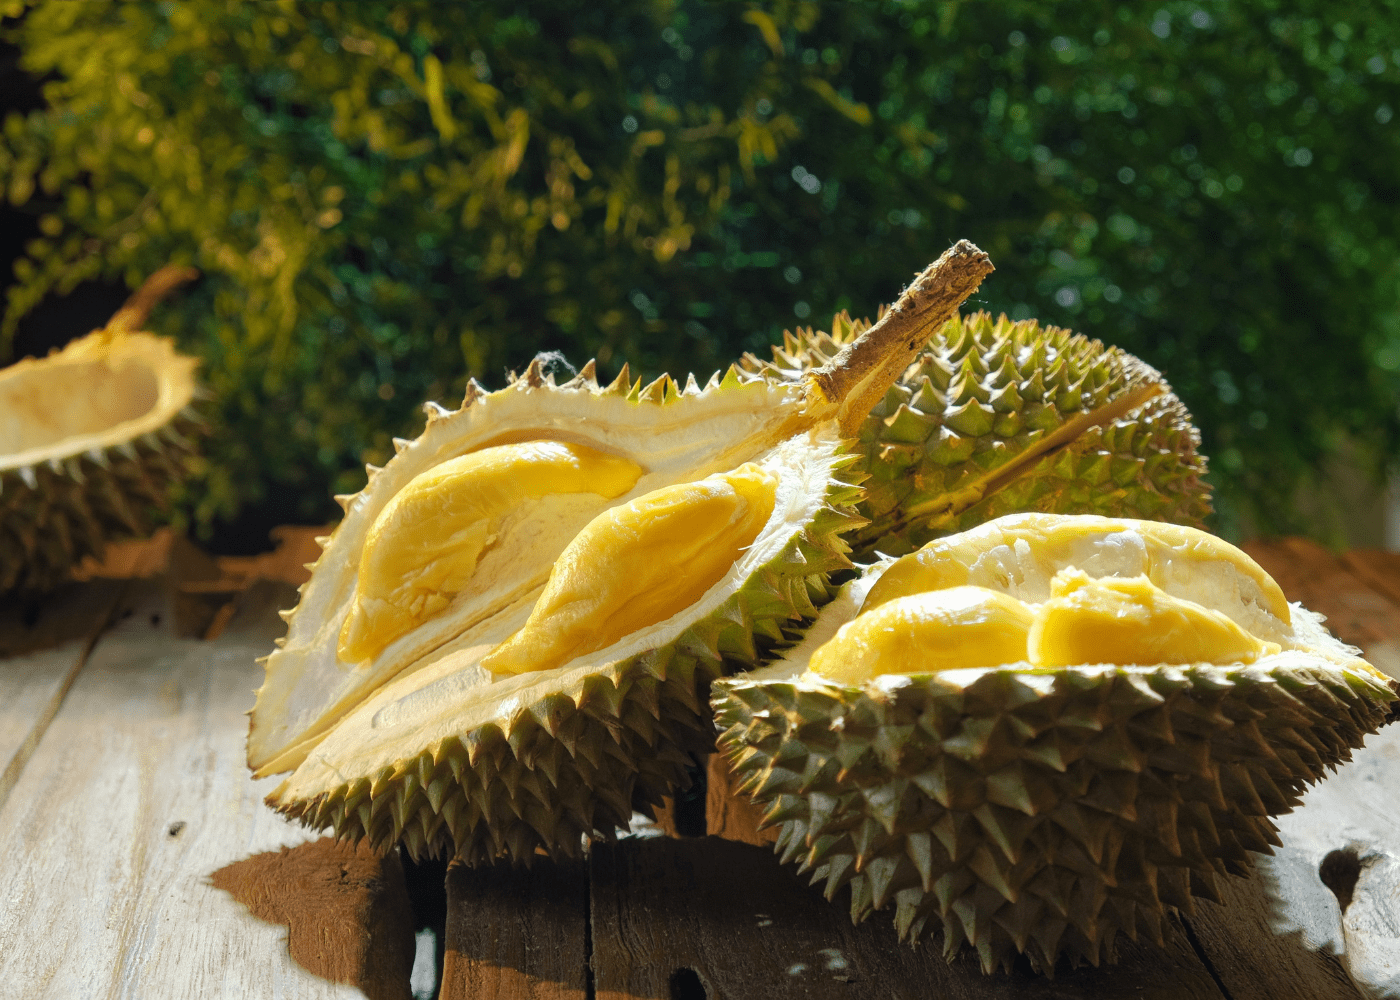 The Most Delicious Tropical Fruits of Vietnam 2023